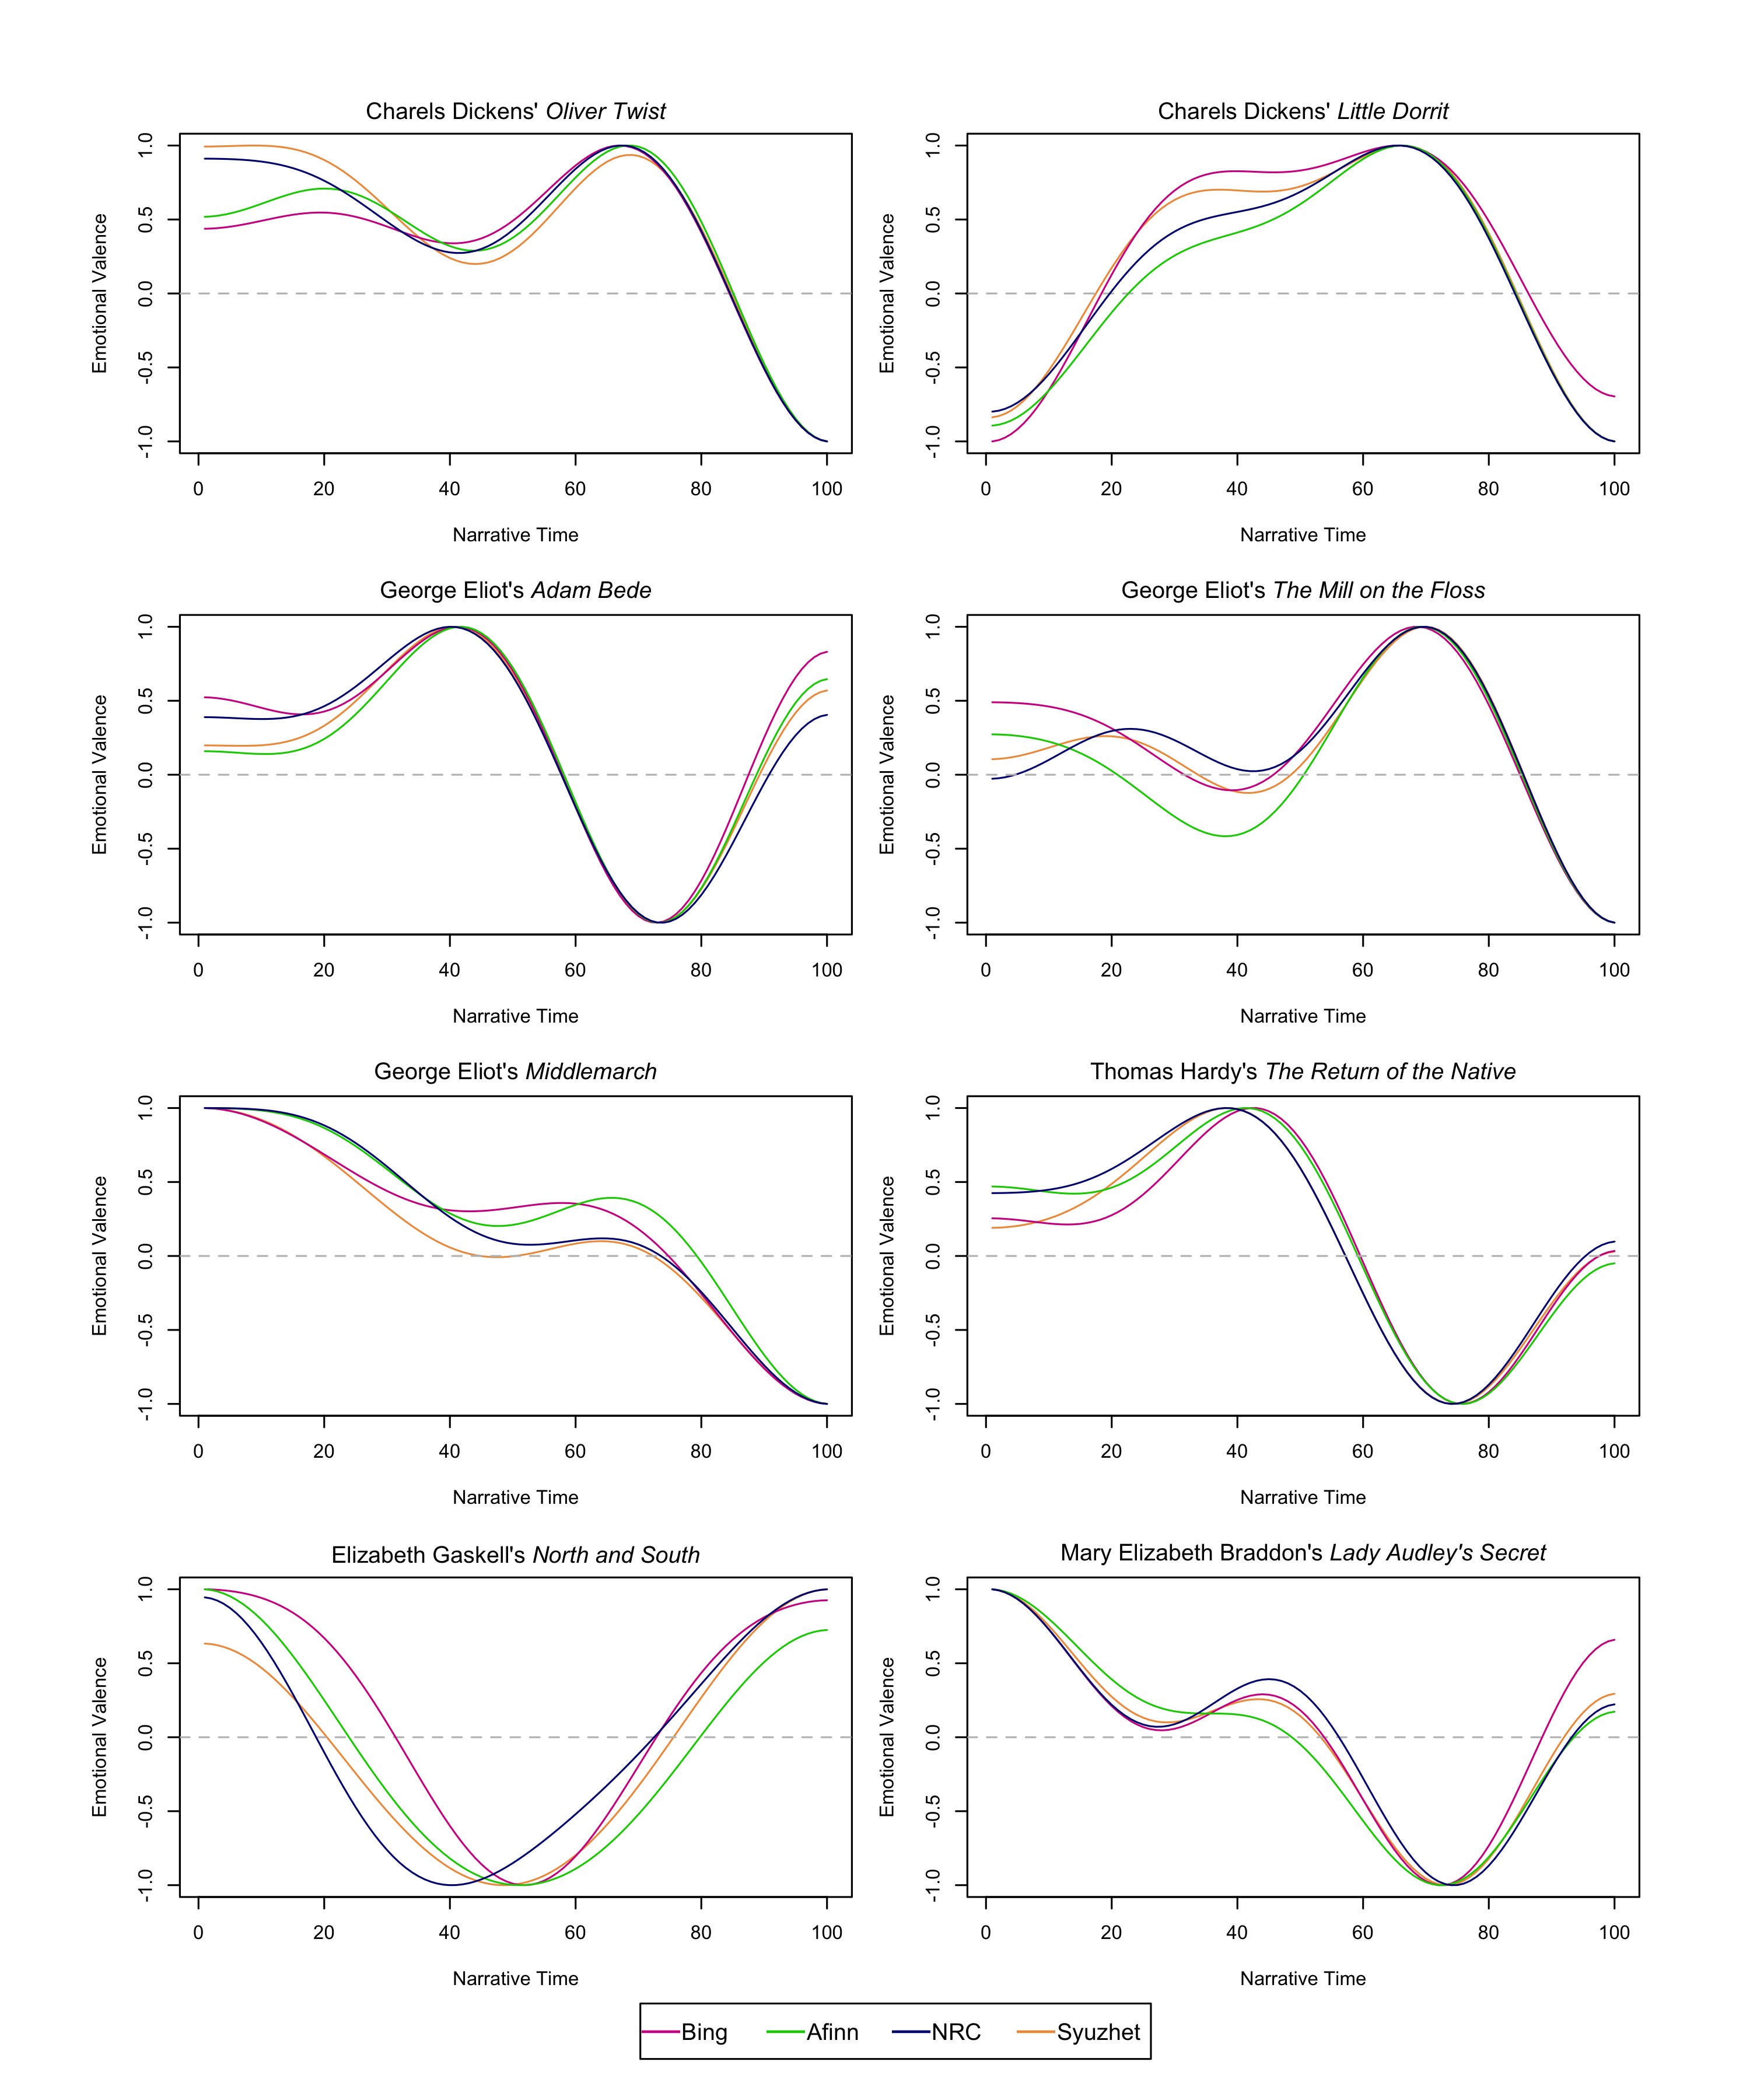 A set of line graphs showing the emotional valence with respect to narrative
                  time of eight different novels. Each graph features emotional valence as
                  calculated by four different lexicons, and the lines produced by the lexicons are
                  very similar in trajectory.